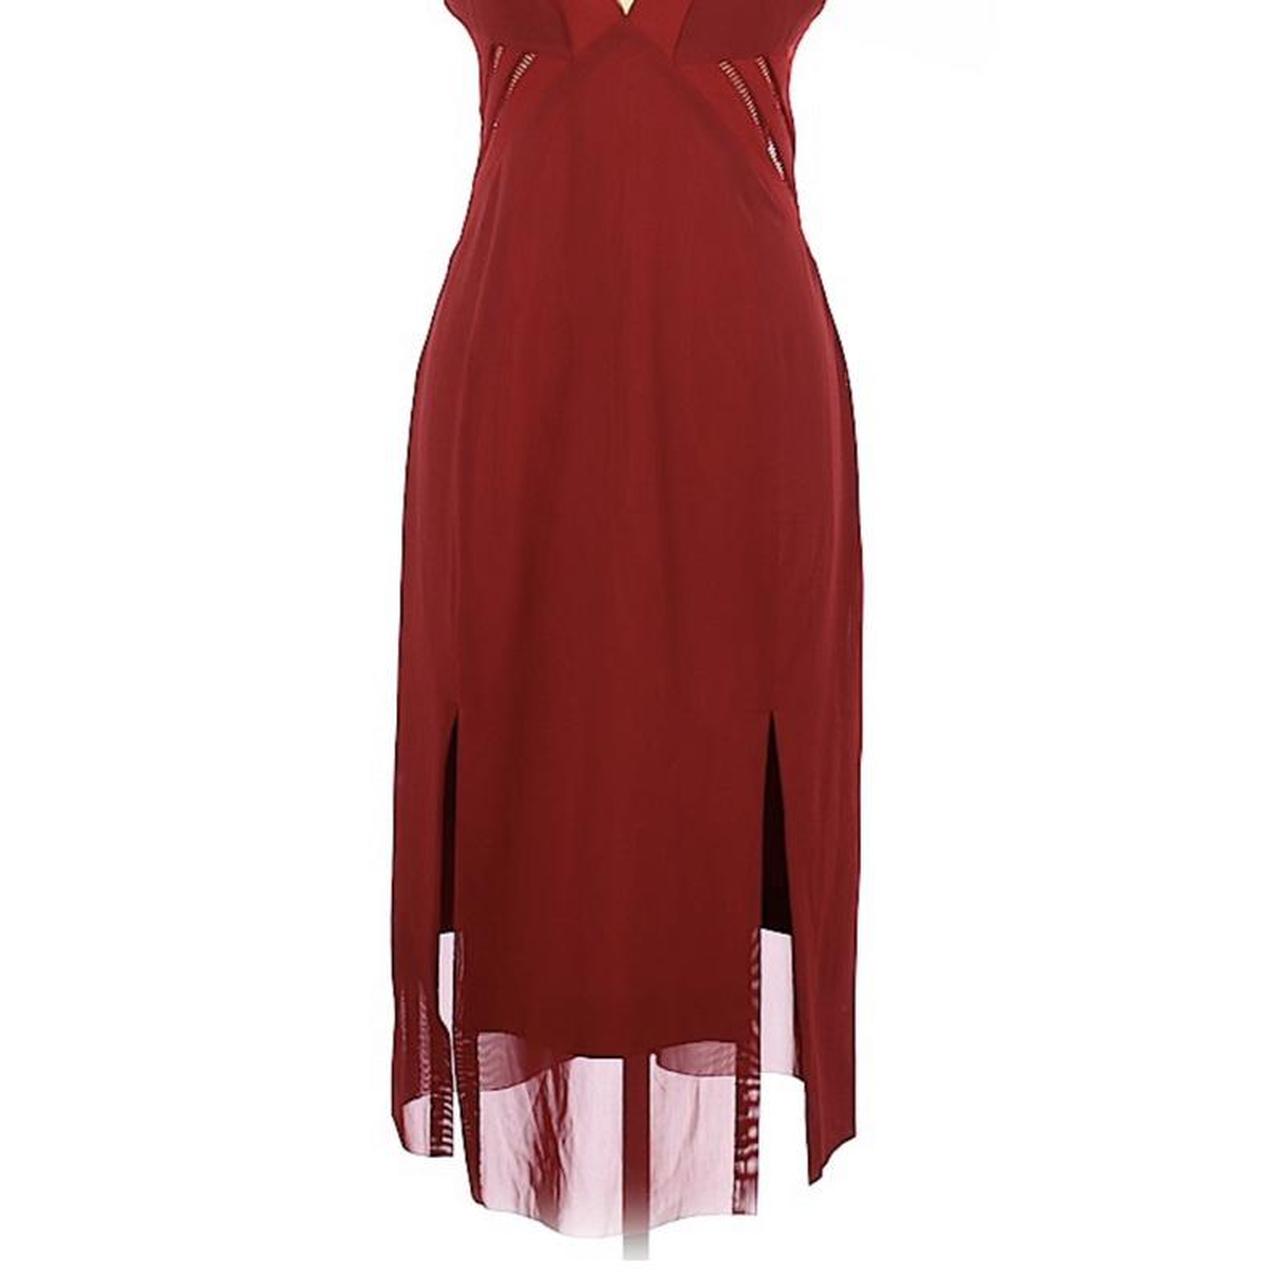 Product Image 2 - ✨Three Floor Cocktail Dress✨
❣️33” Chest,